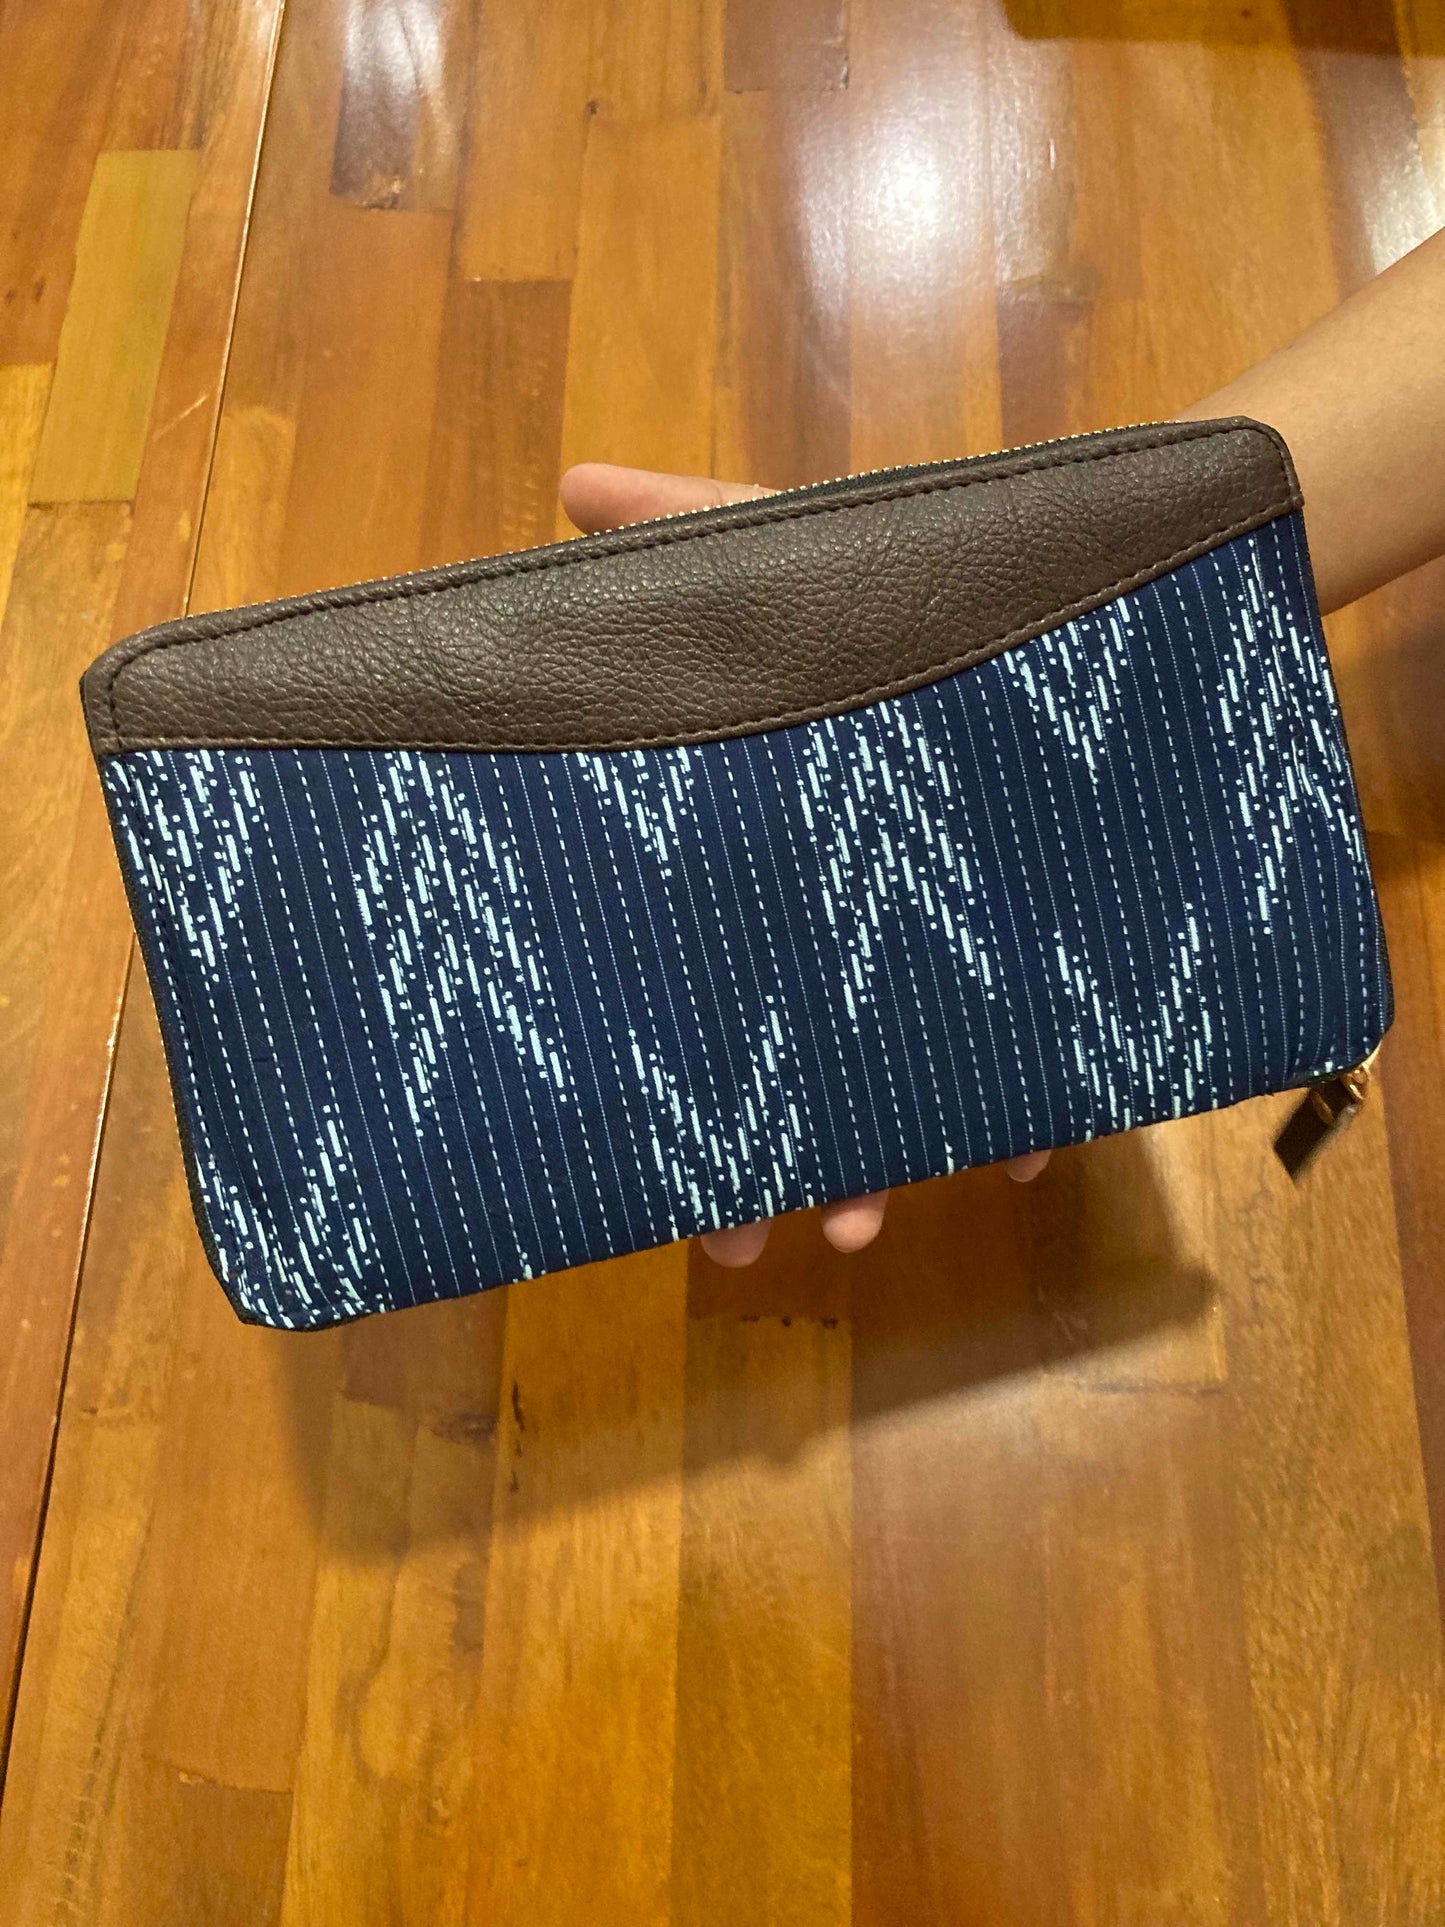 Southloom™ Handmade Purse with Dark Blue Jacquard Cloth and Leatherette